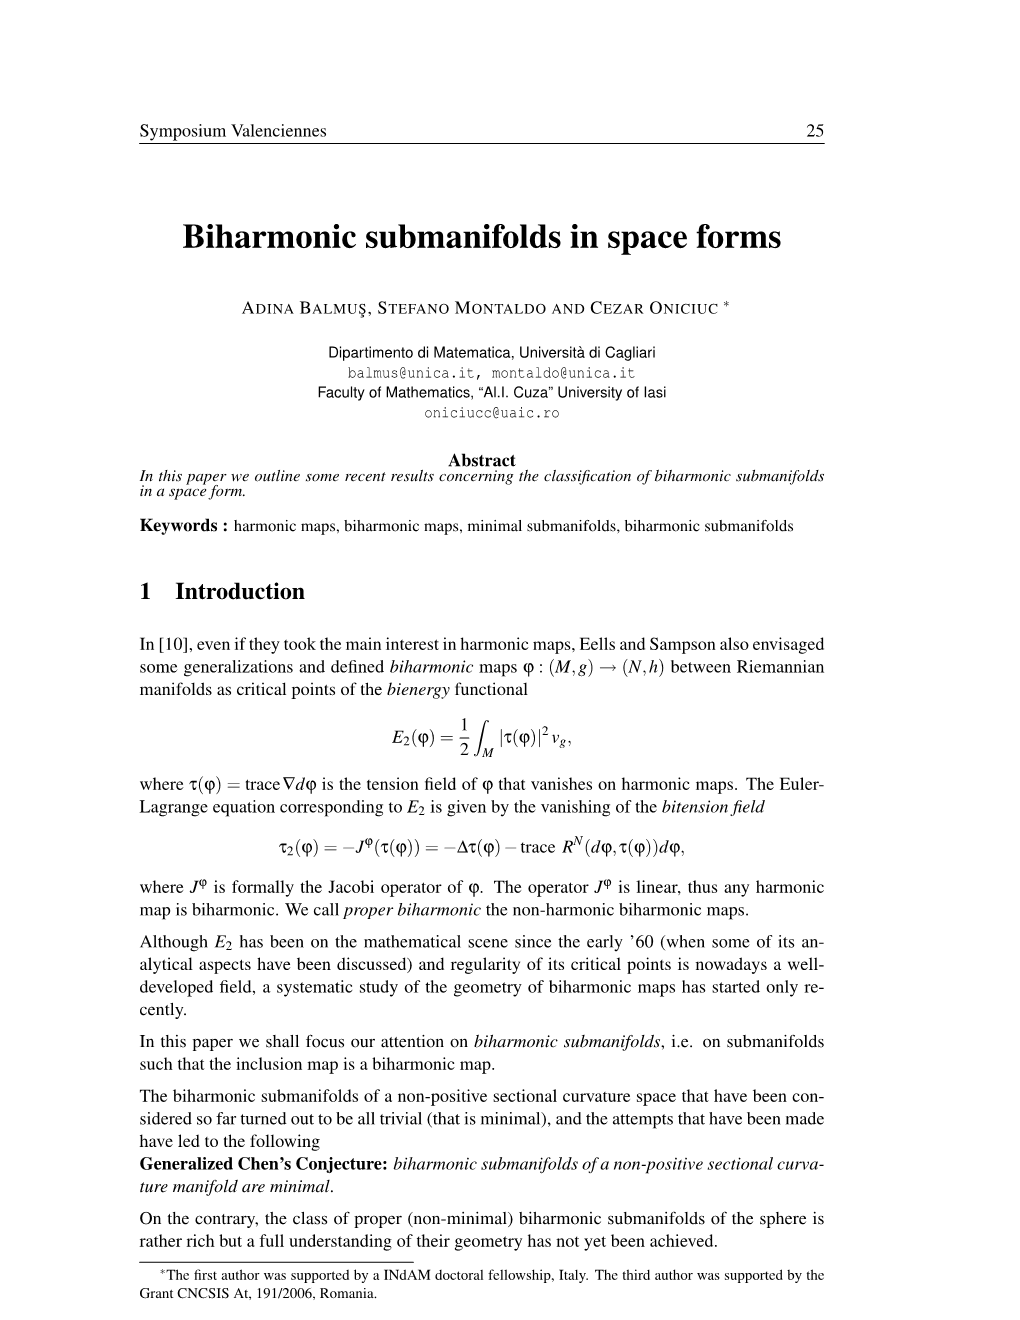 Biharmonic Submanifolds in Space Forms